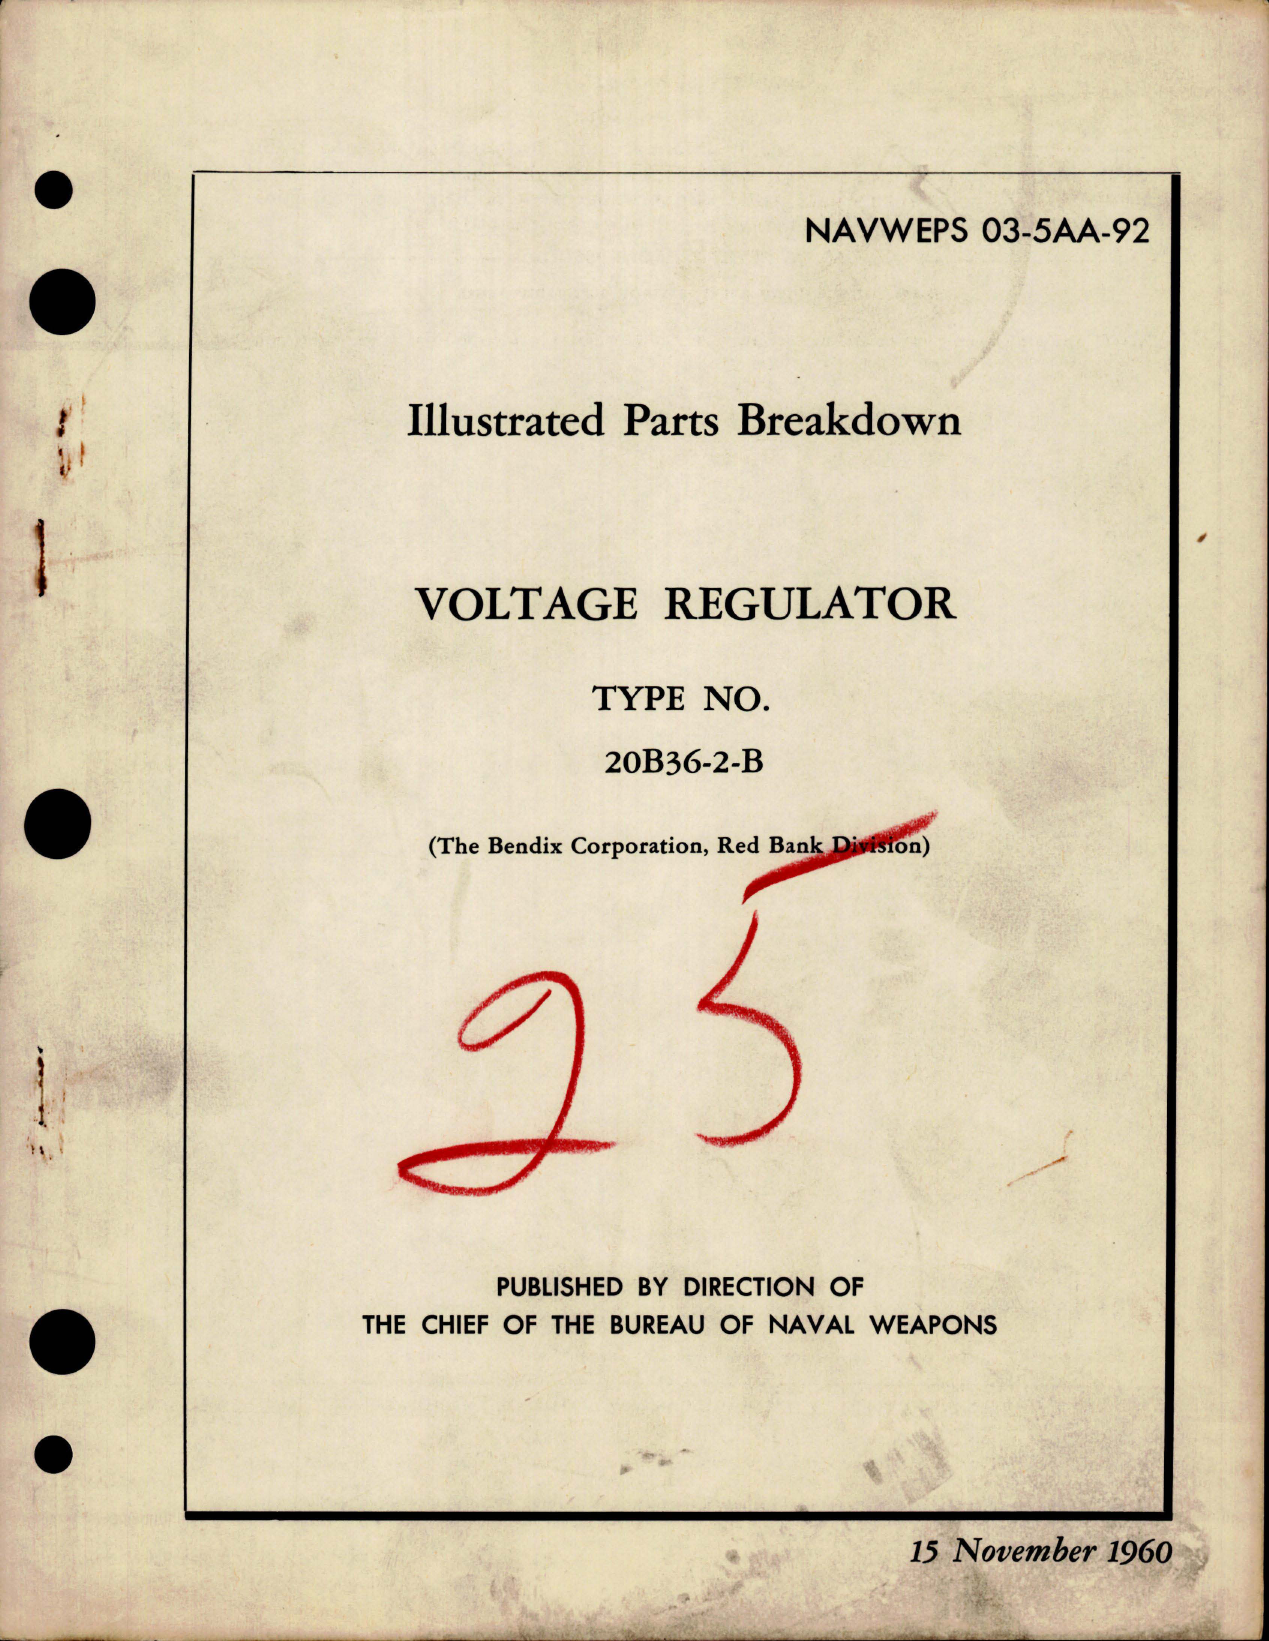 Sample page 1 from AirCorps Library document: Illustrated Parts Breakdown for Voltage Regulator - Type 20B36-2-B 